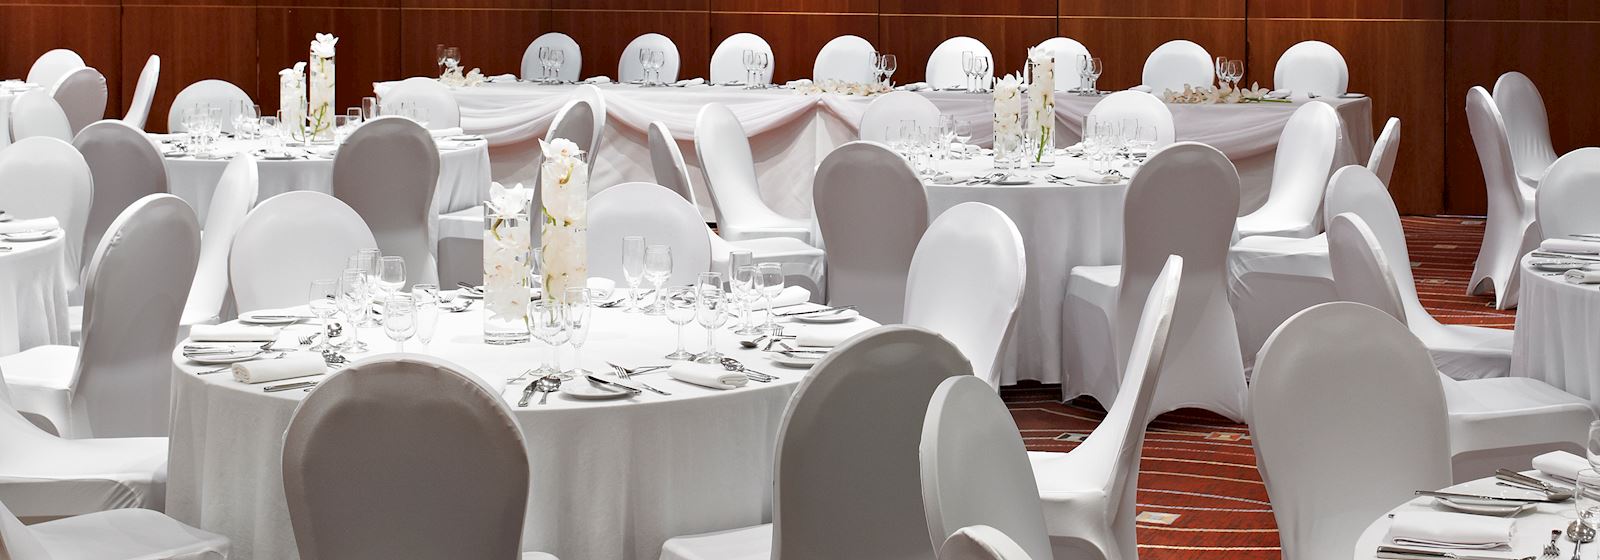 wedding party function rooms newcastle